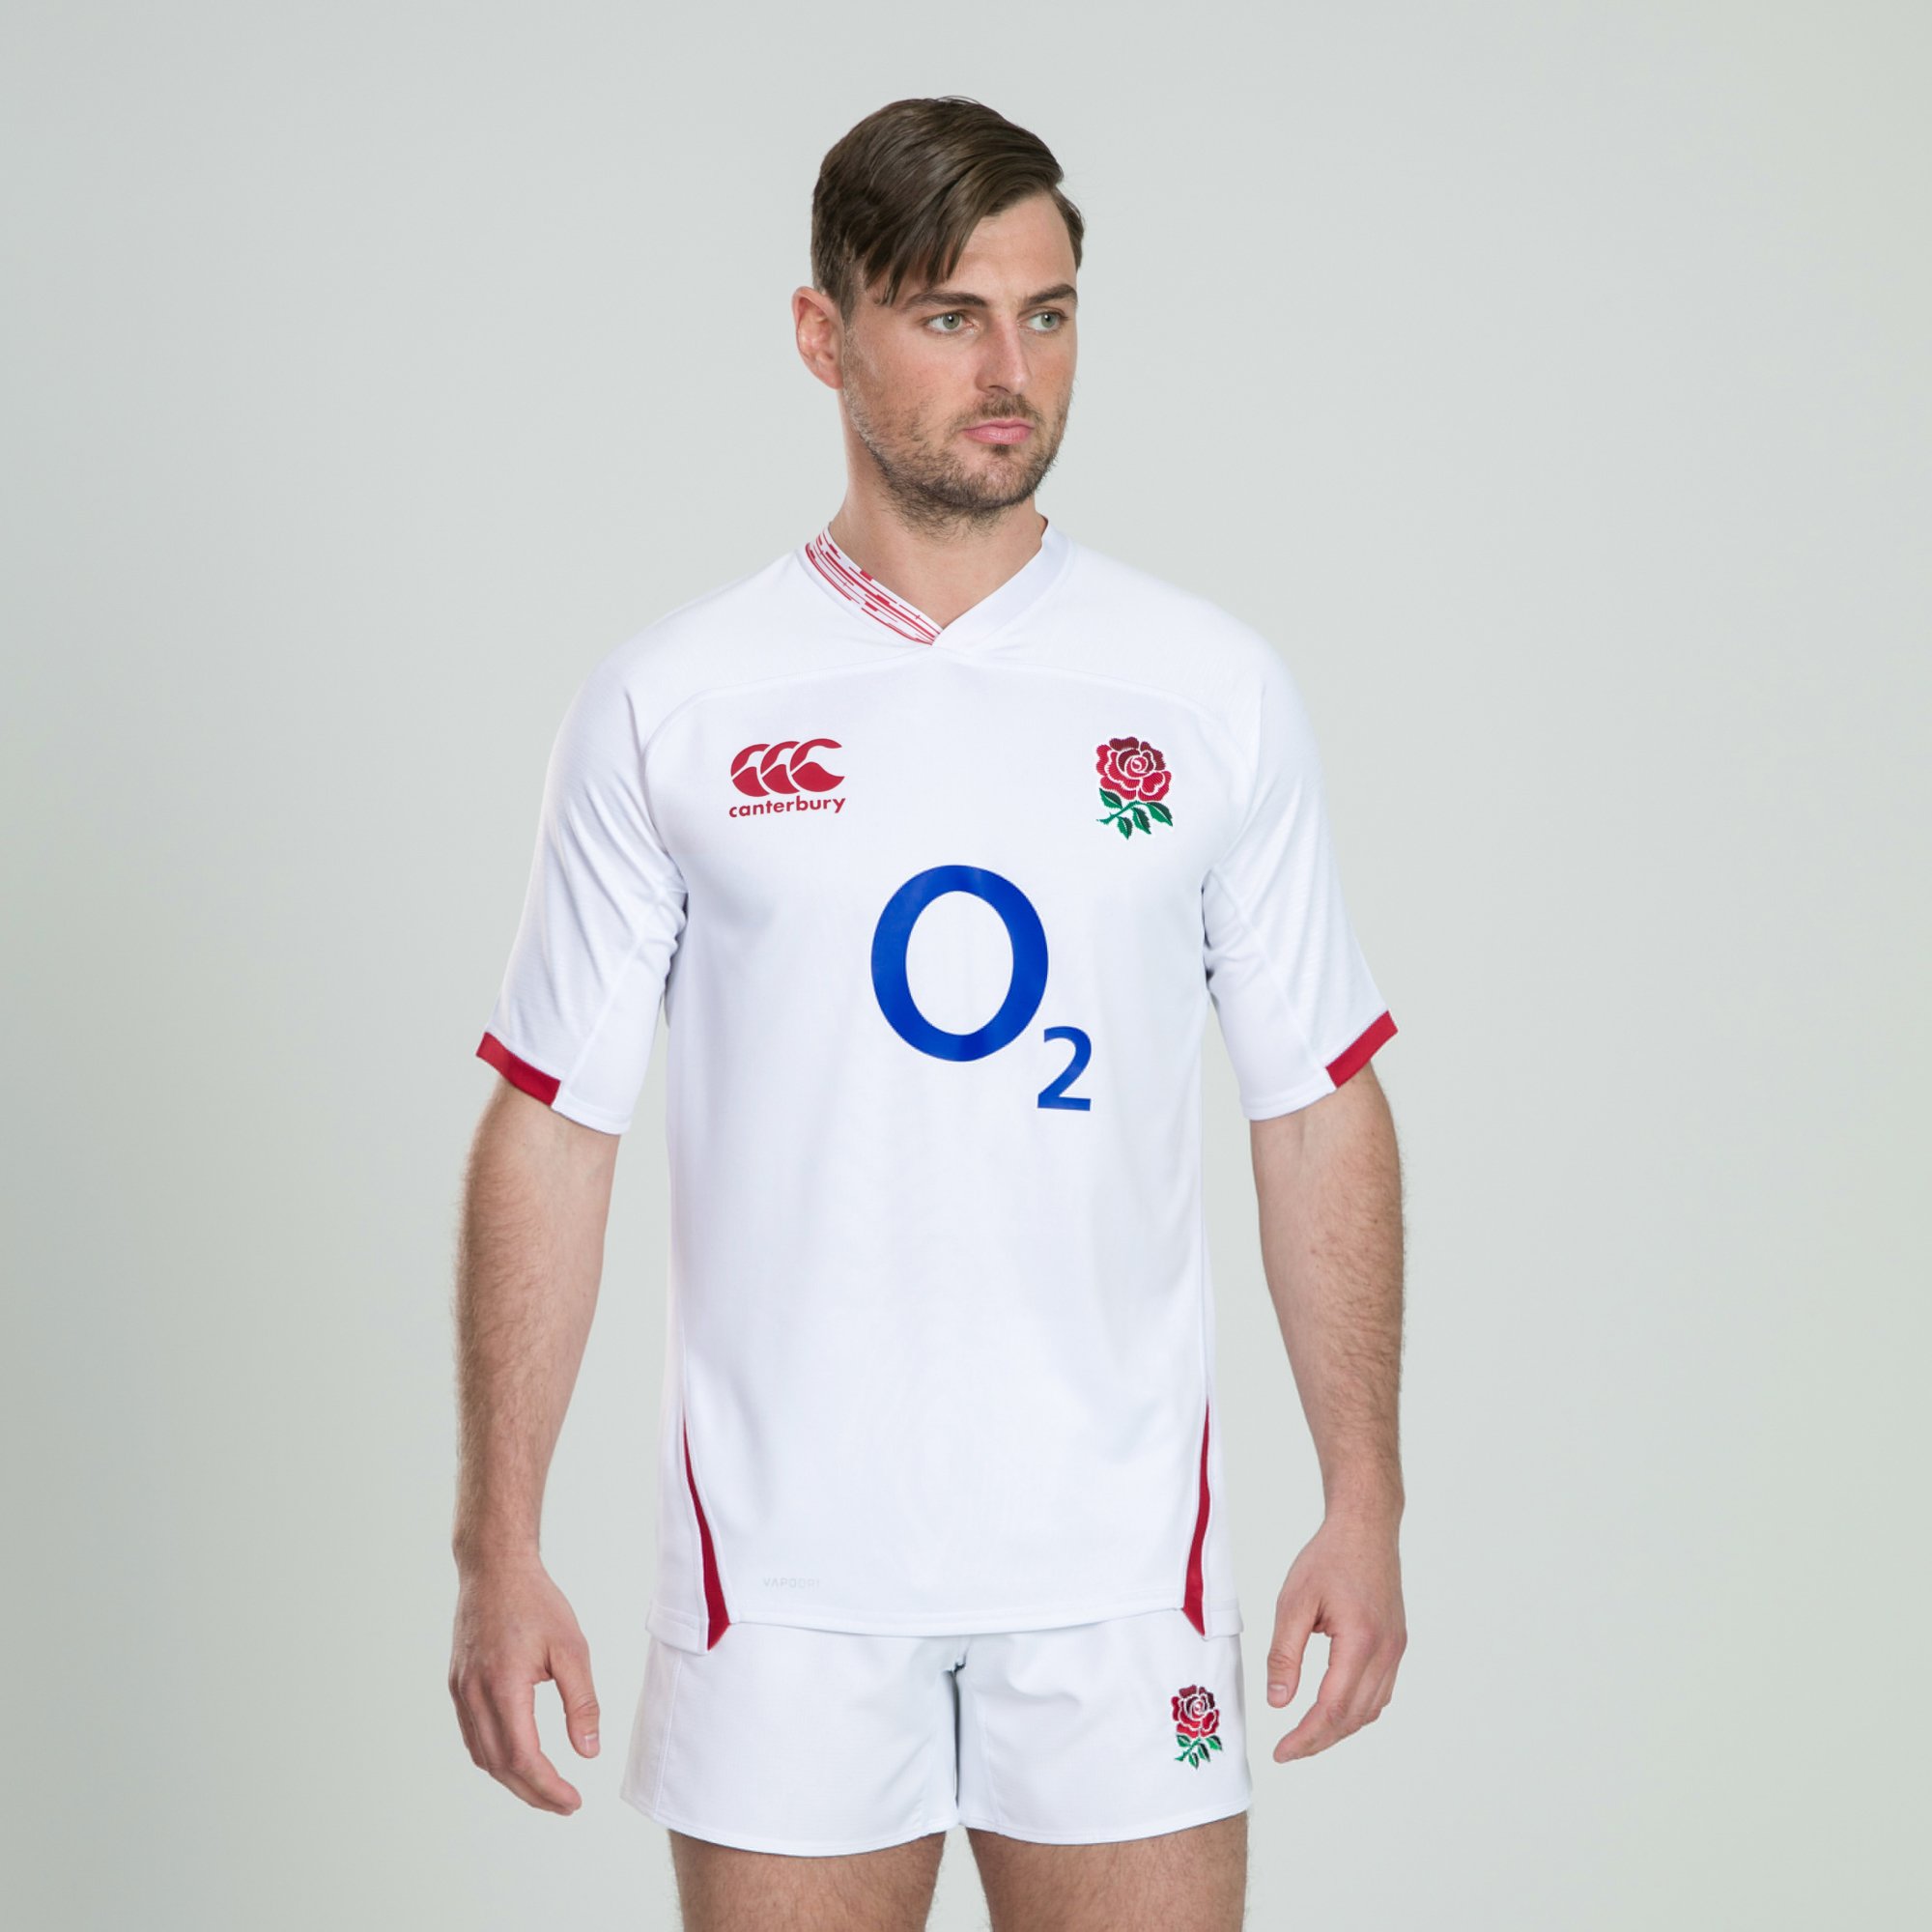 Man in England jersey